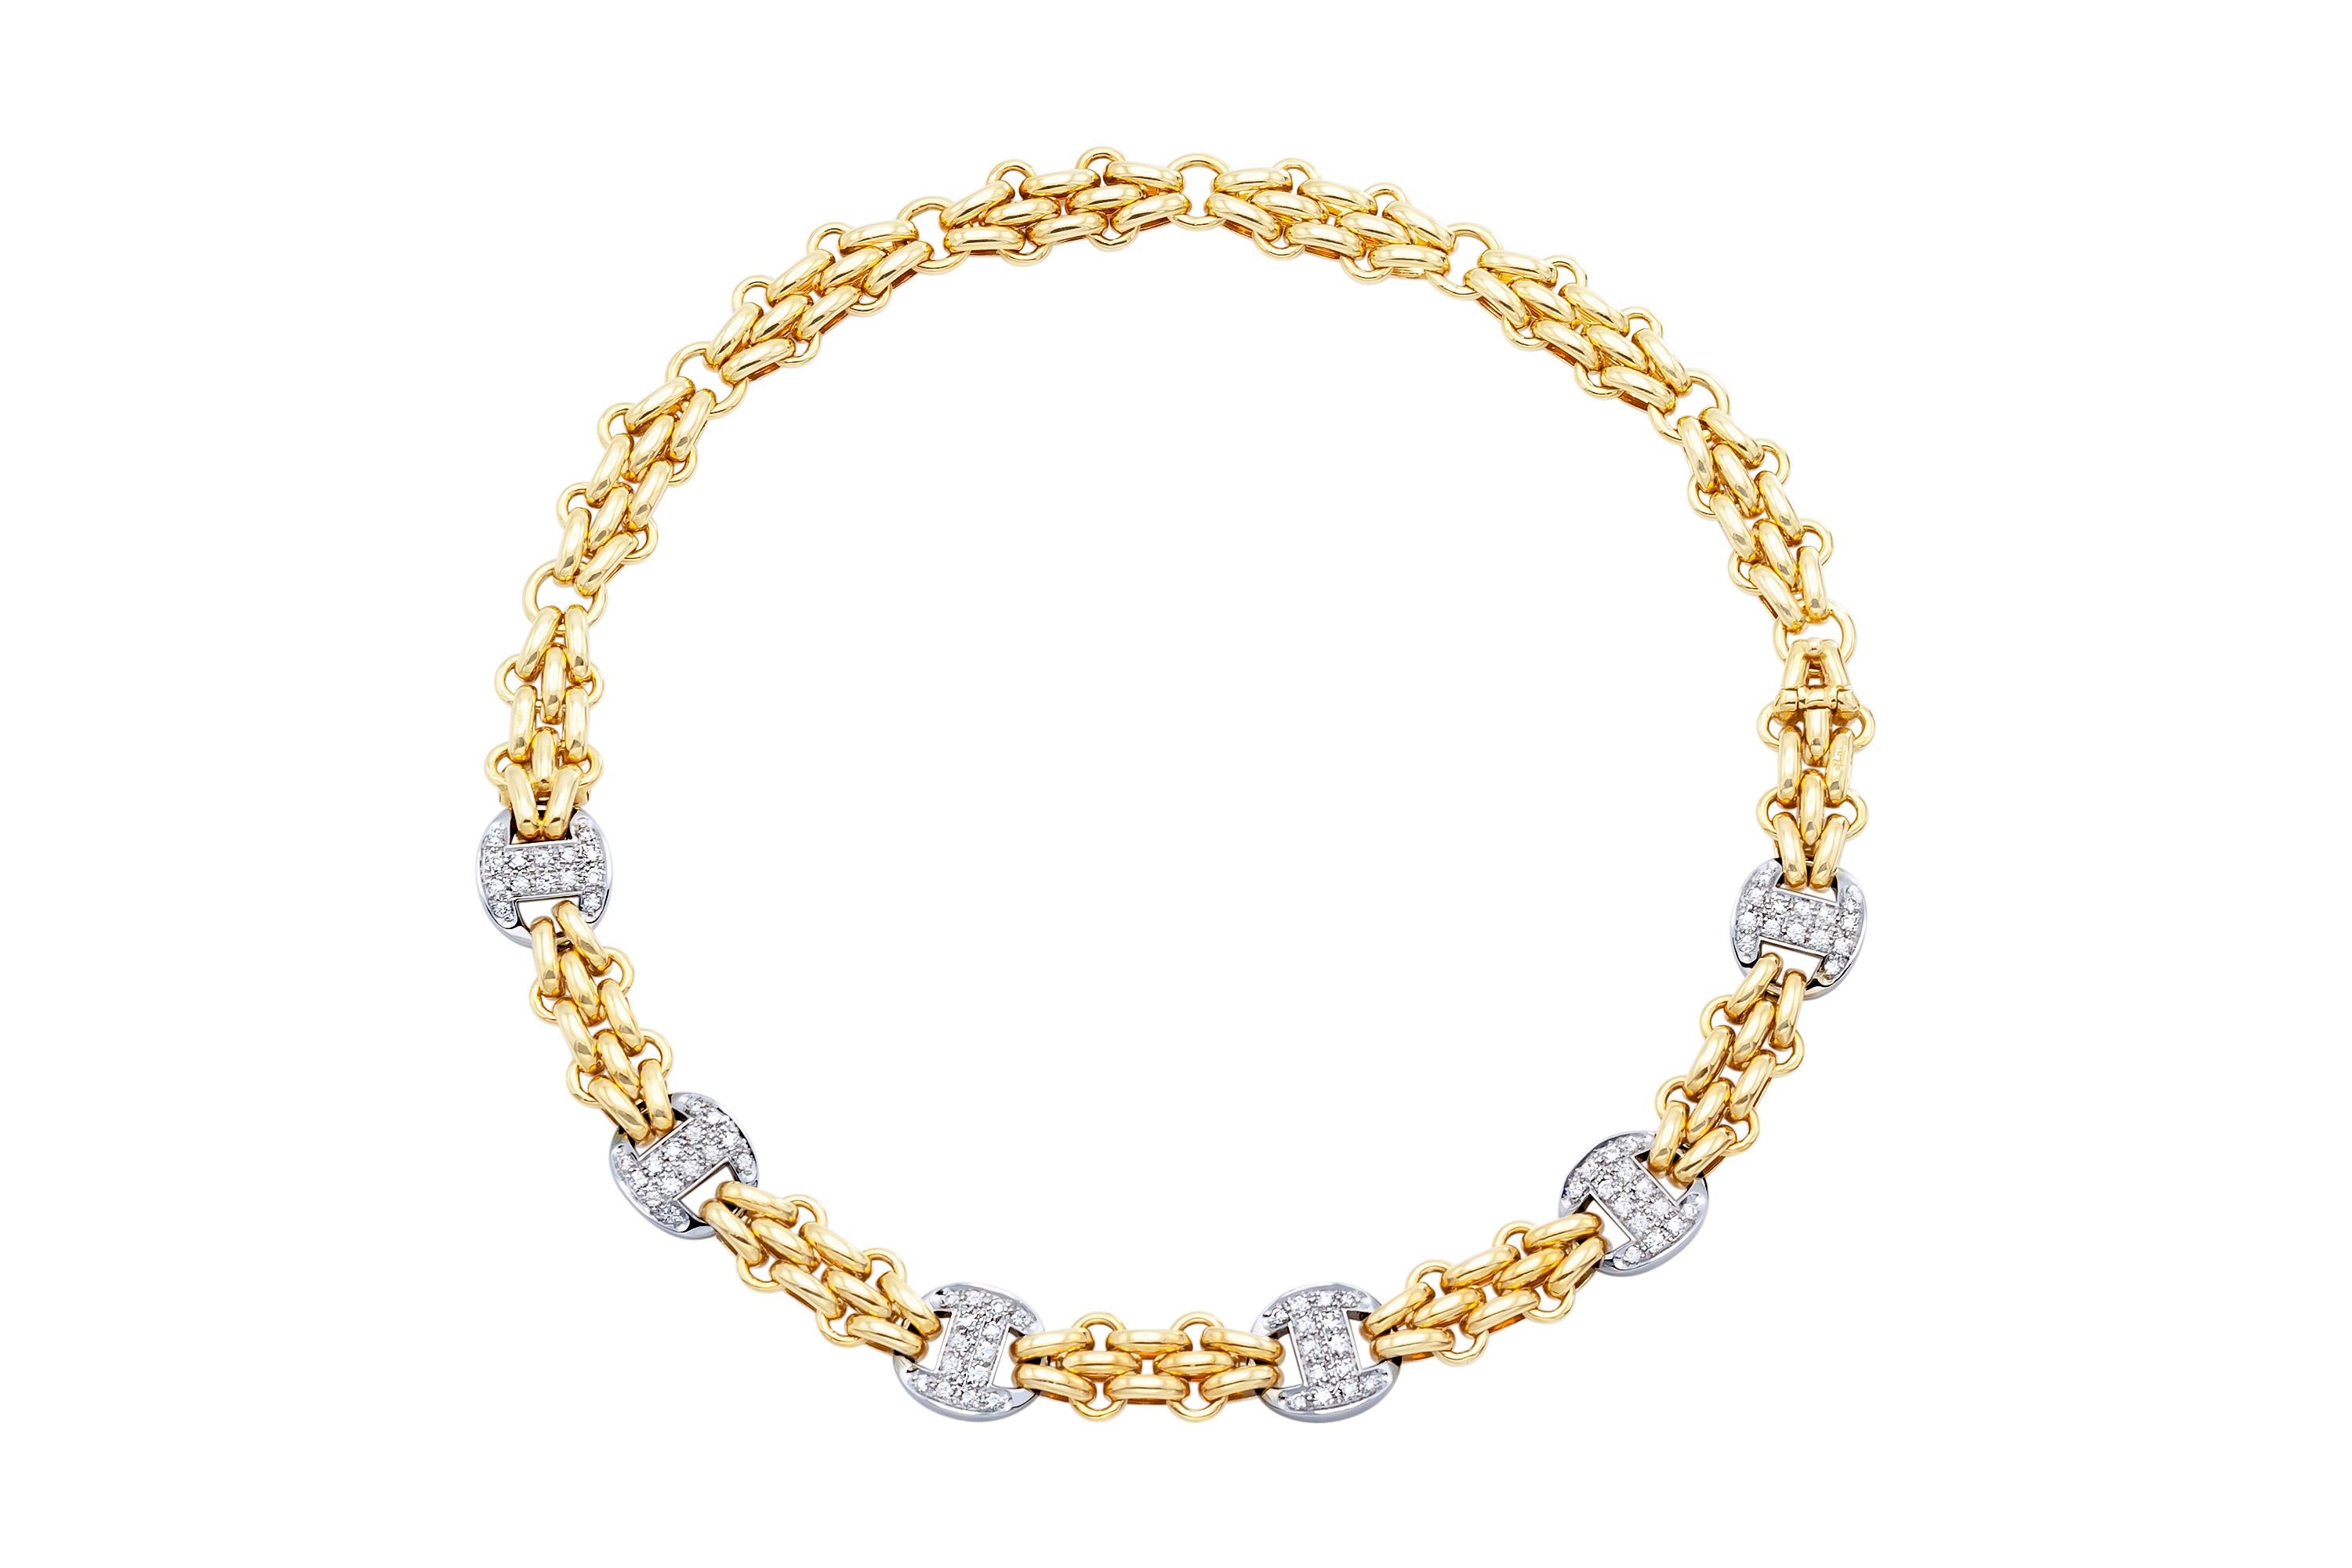 Finely crafted in 18k white and yellow gold with Round Brilliant cut diamonds weighing approximately a total of 2.50 carats.
Signed by Pomellato